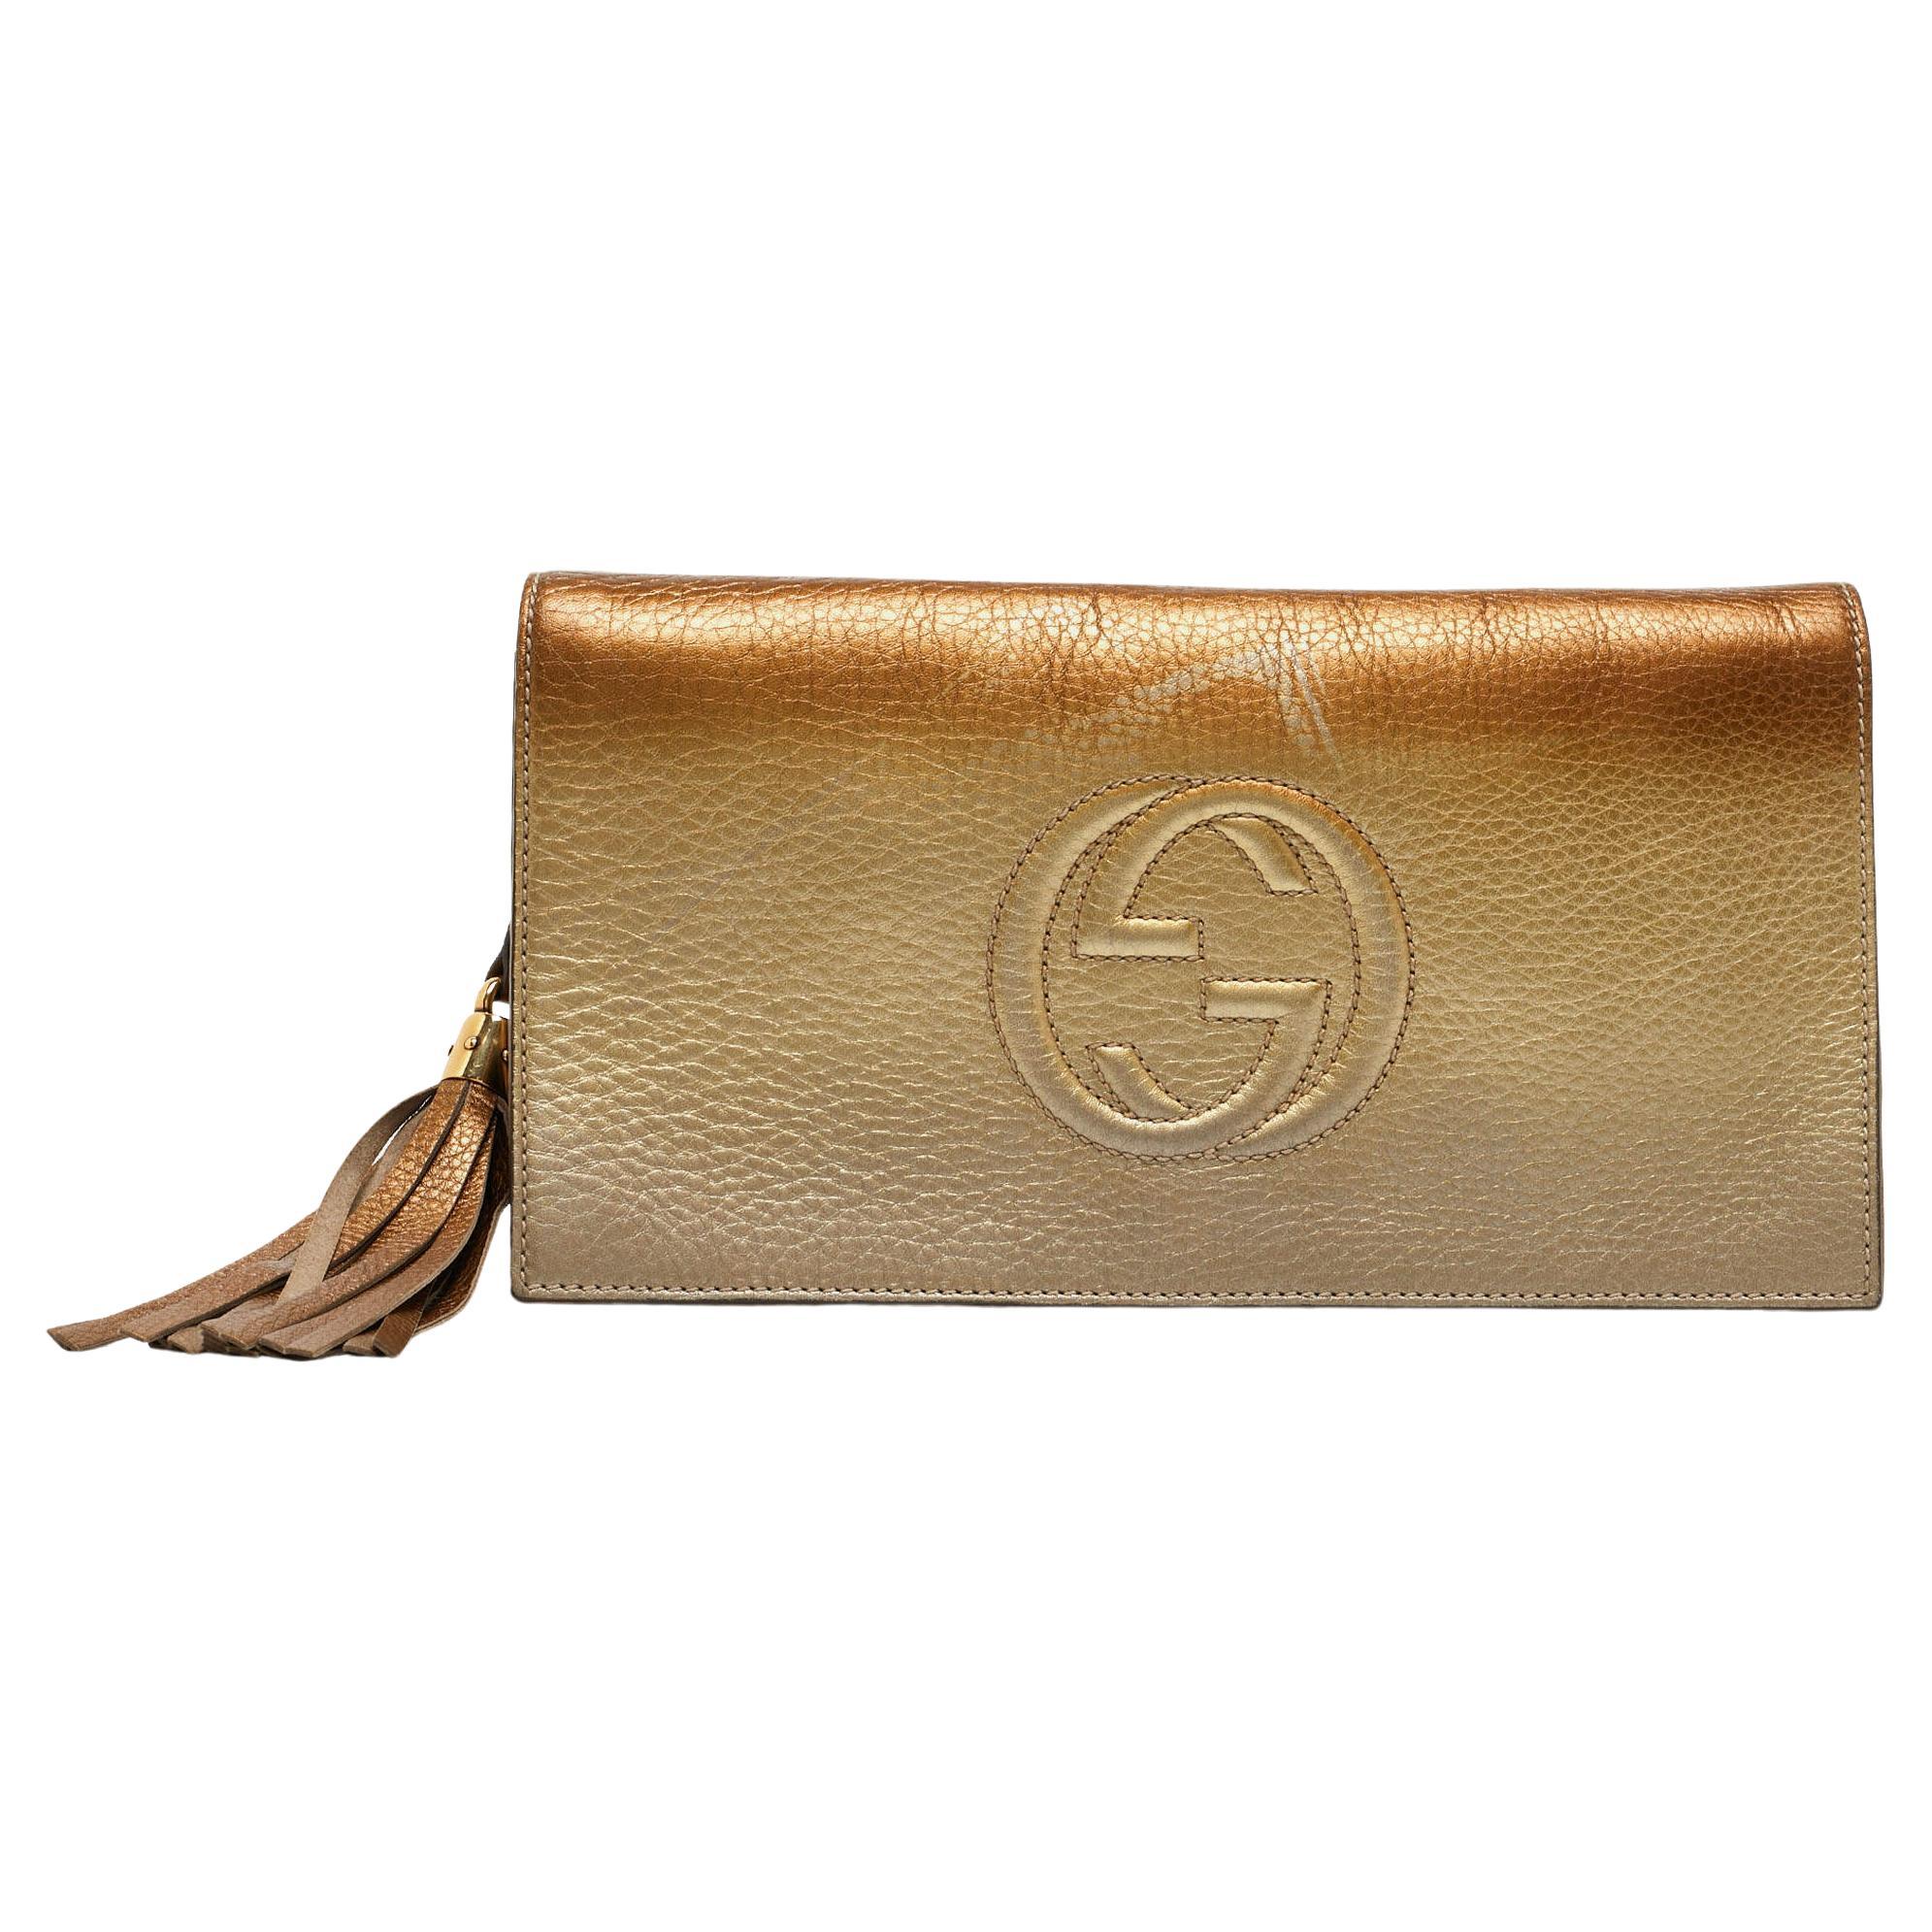 Gucci Ombre Gold Leather Soho Tassel Clutch